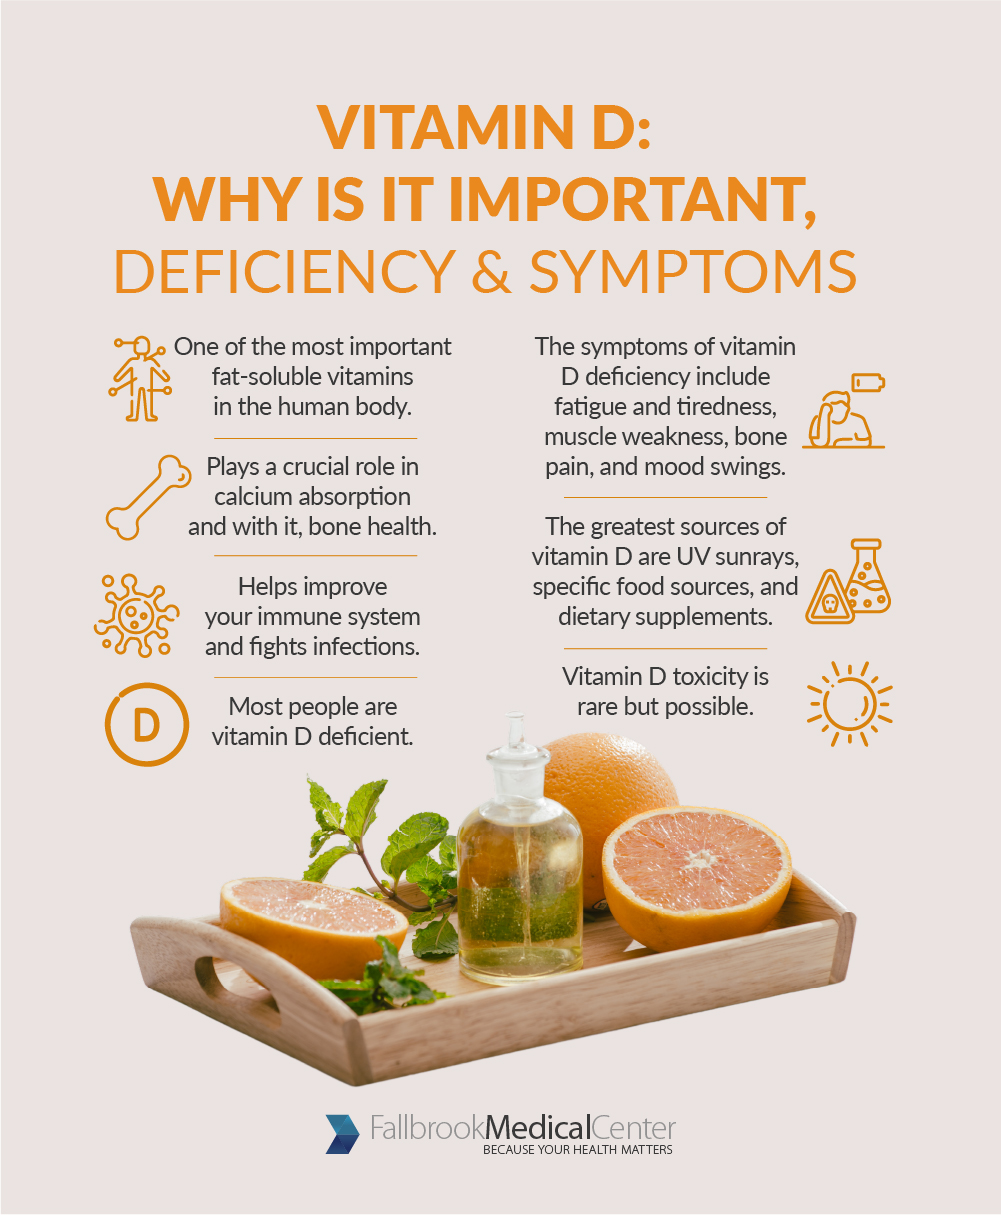 Vitamin D: Why is it Important, Deficiency & Symptoms